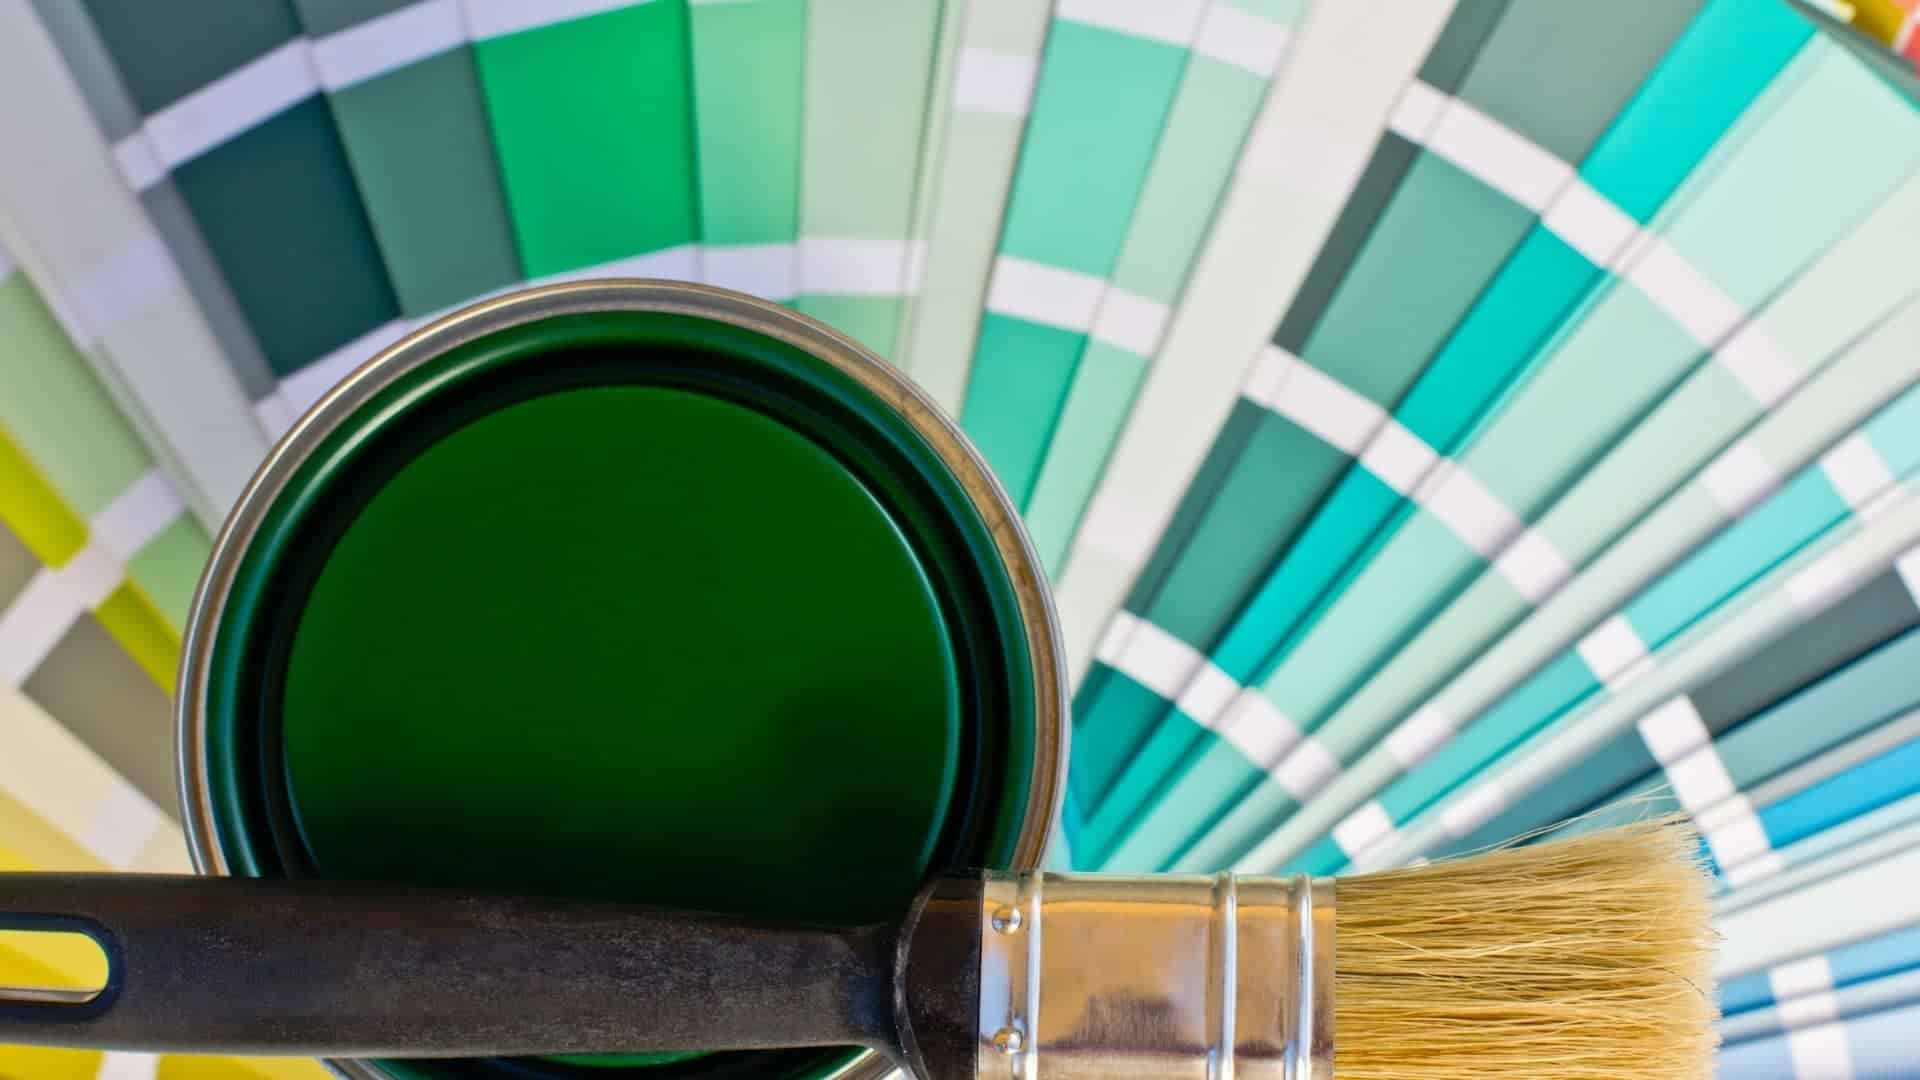 How To Make Green Paint?